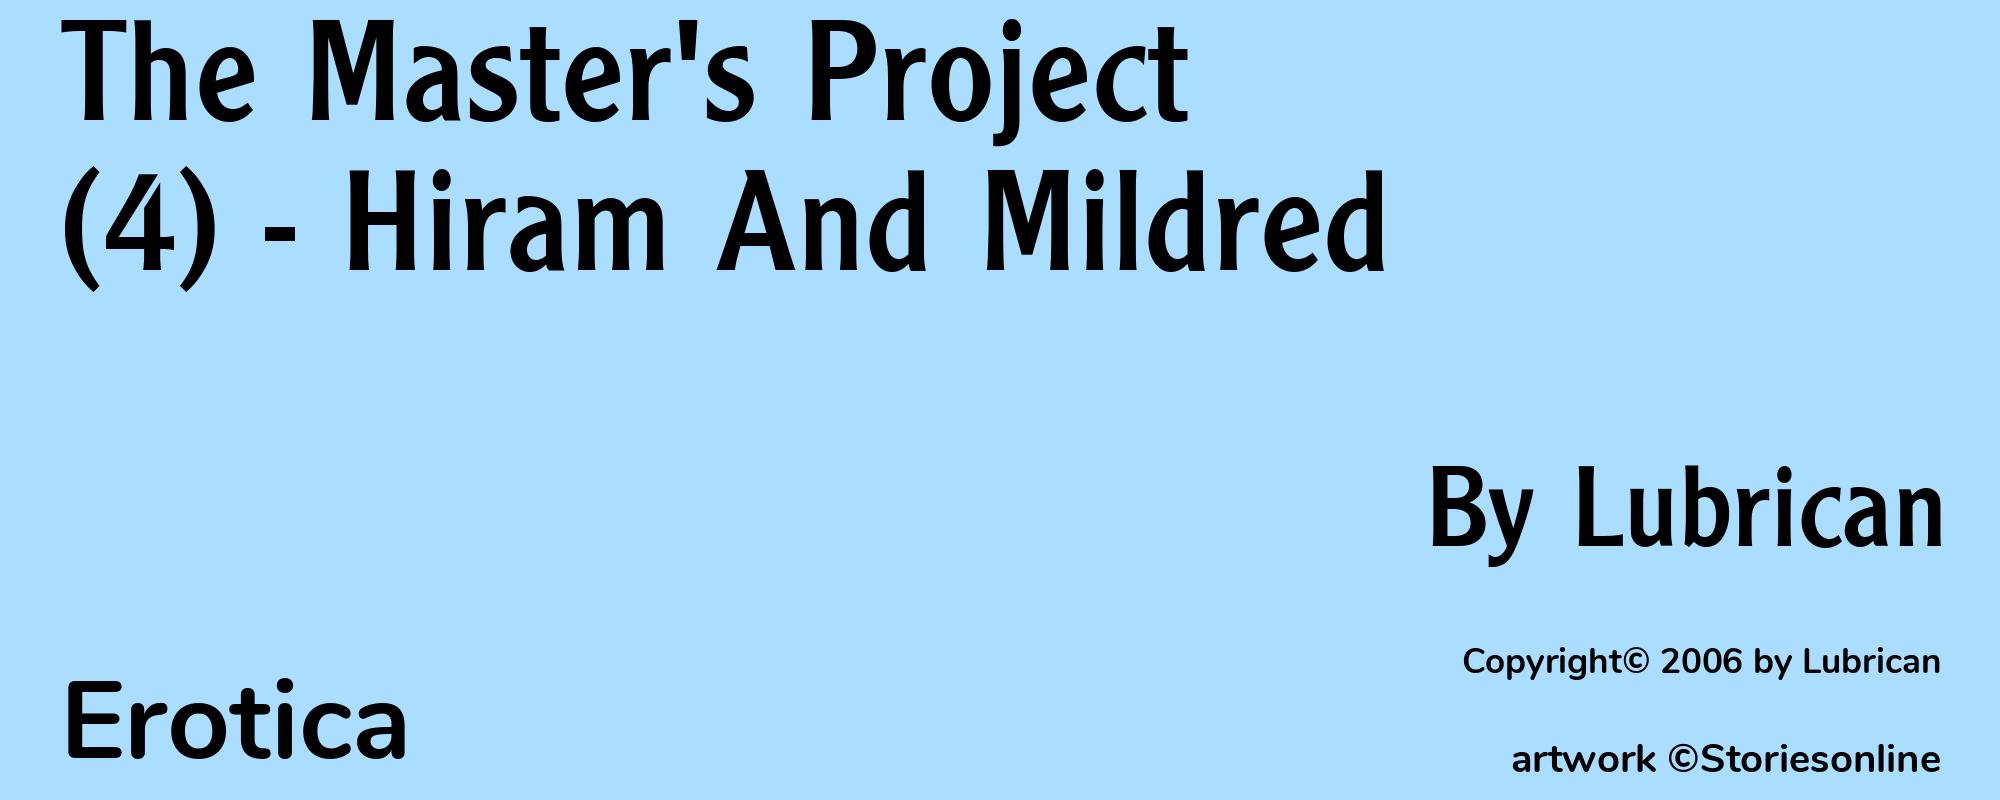 The Master's Project (4) - Hiram And Mildred - Cover